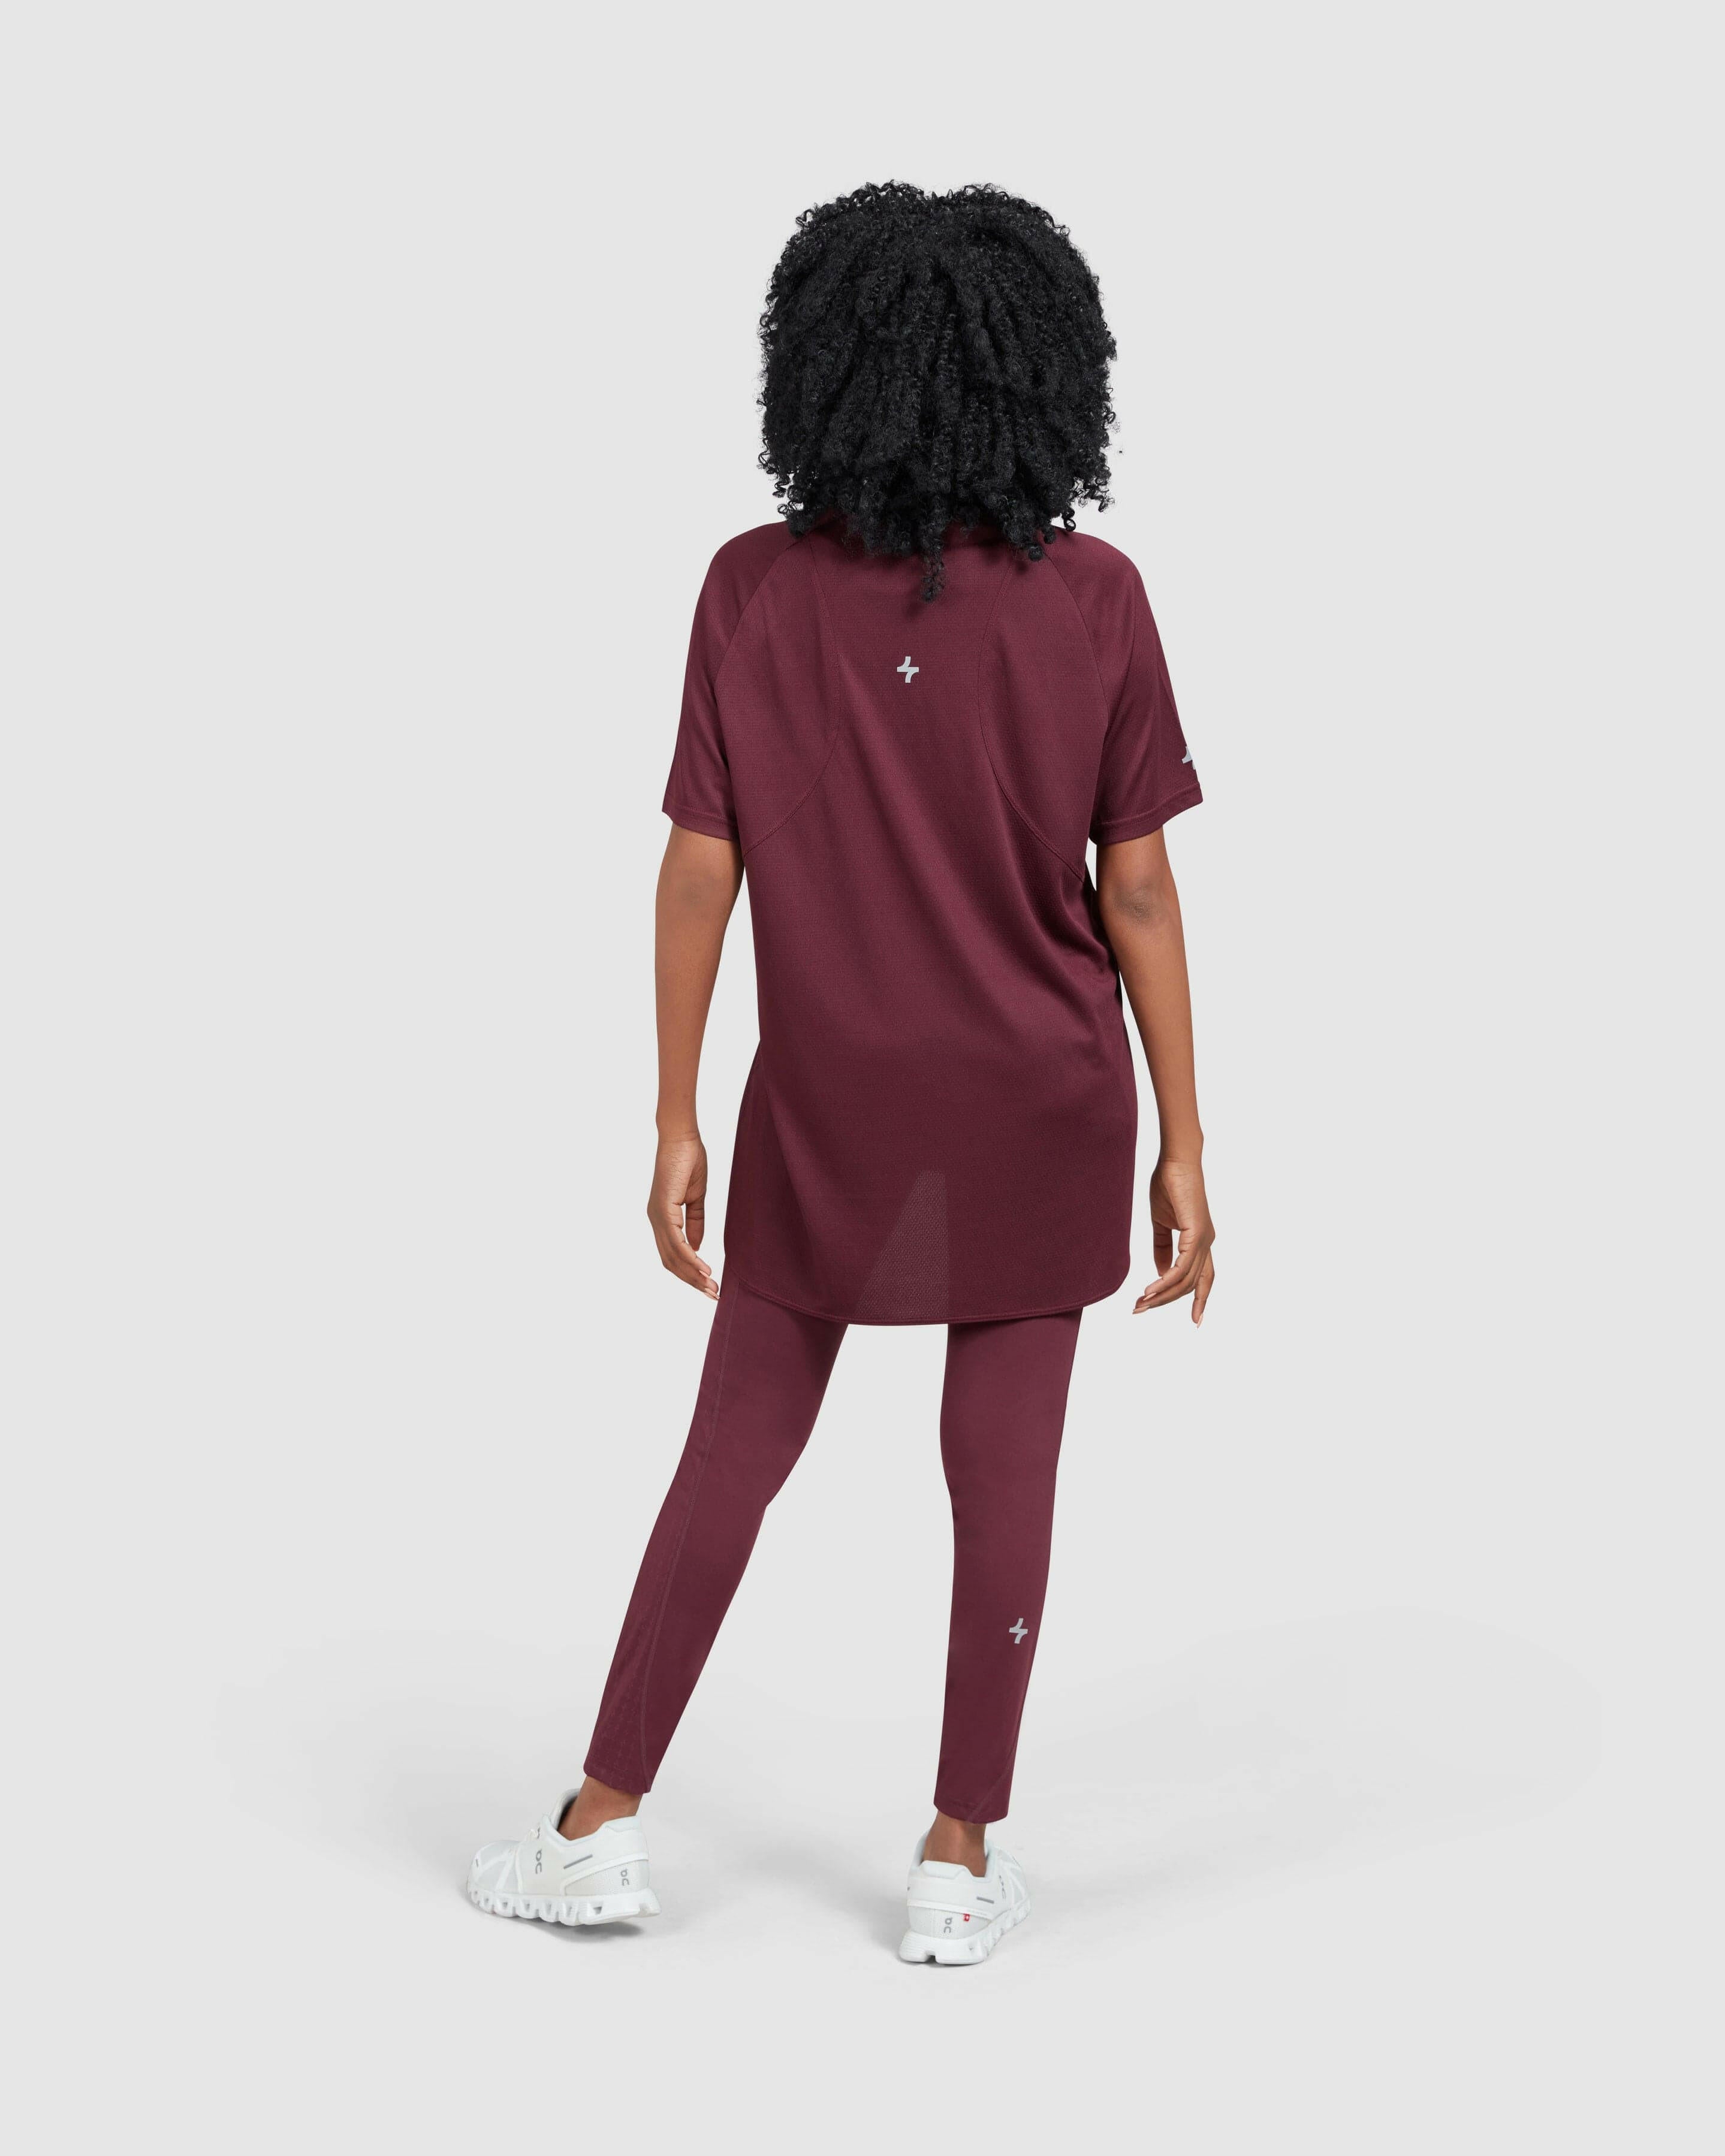 A model seen from behind wearing a maroon Modest  LADINA LEGGINGS by Qynda.